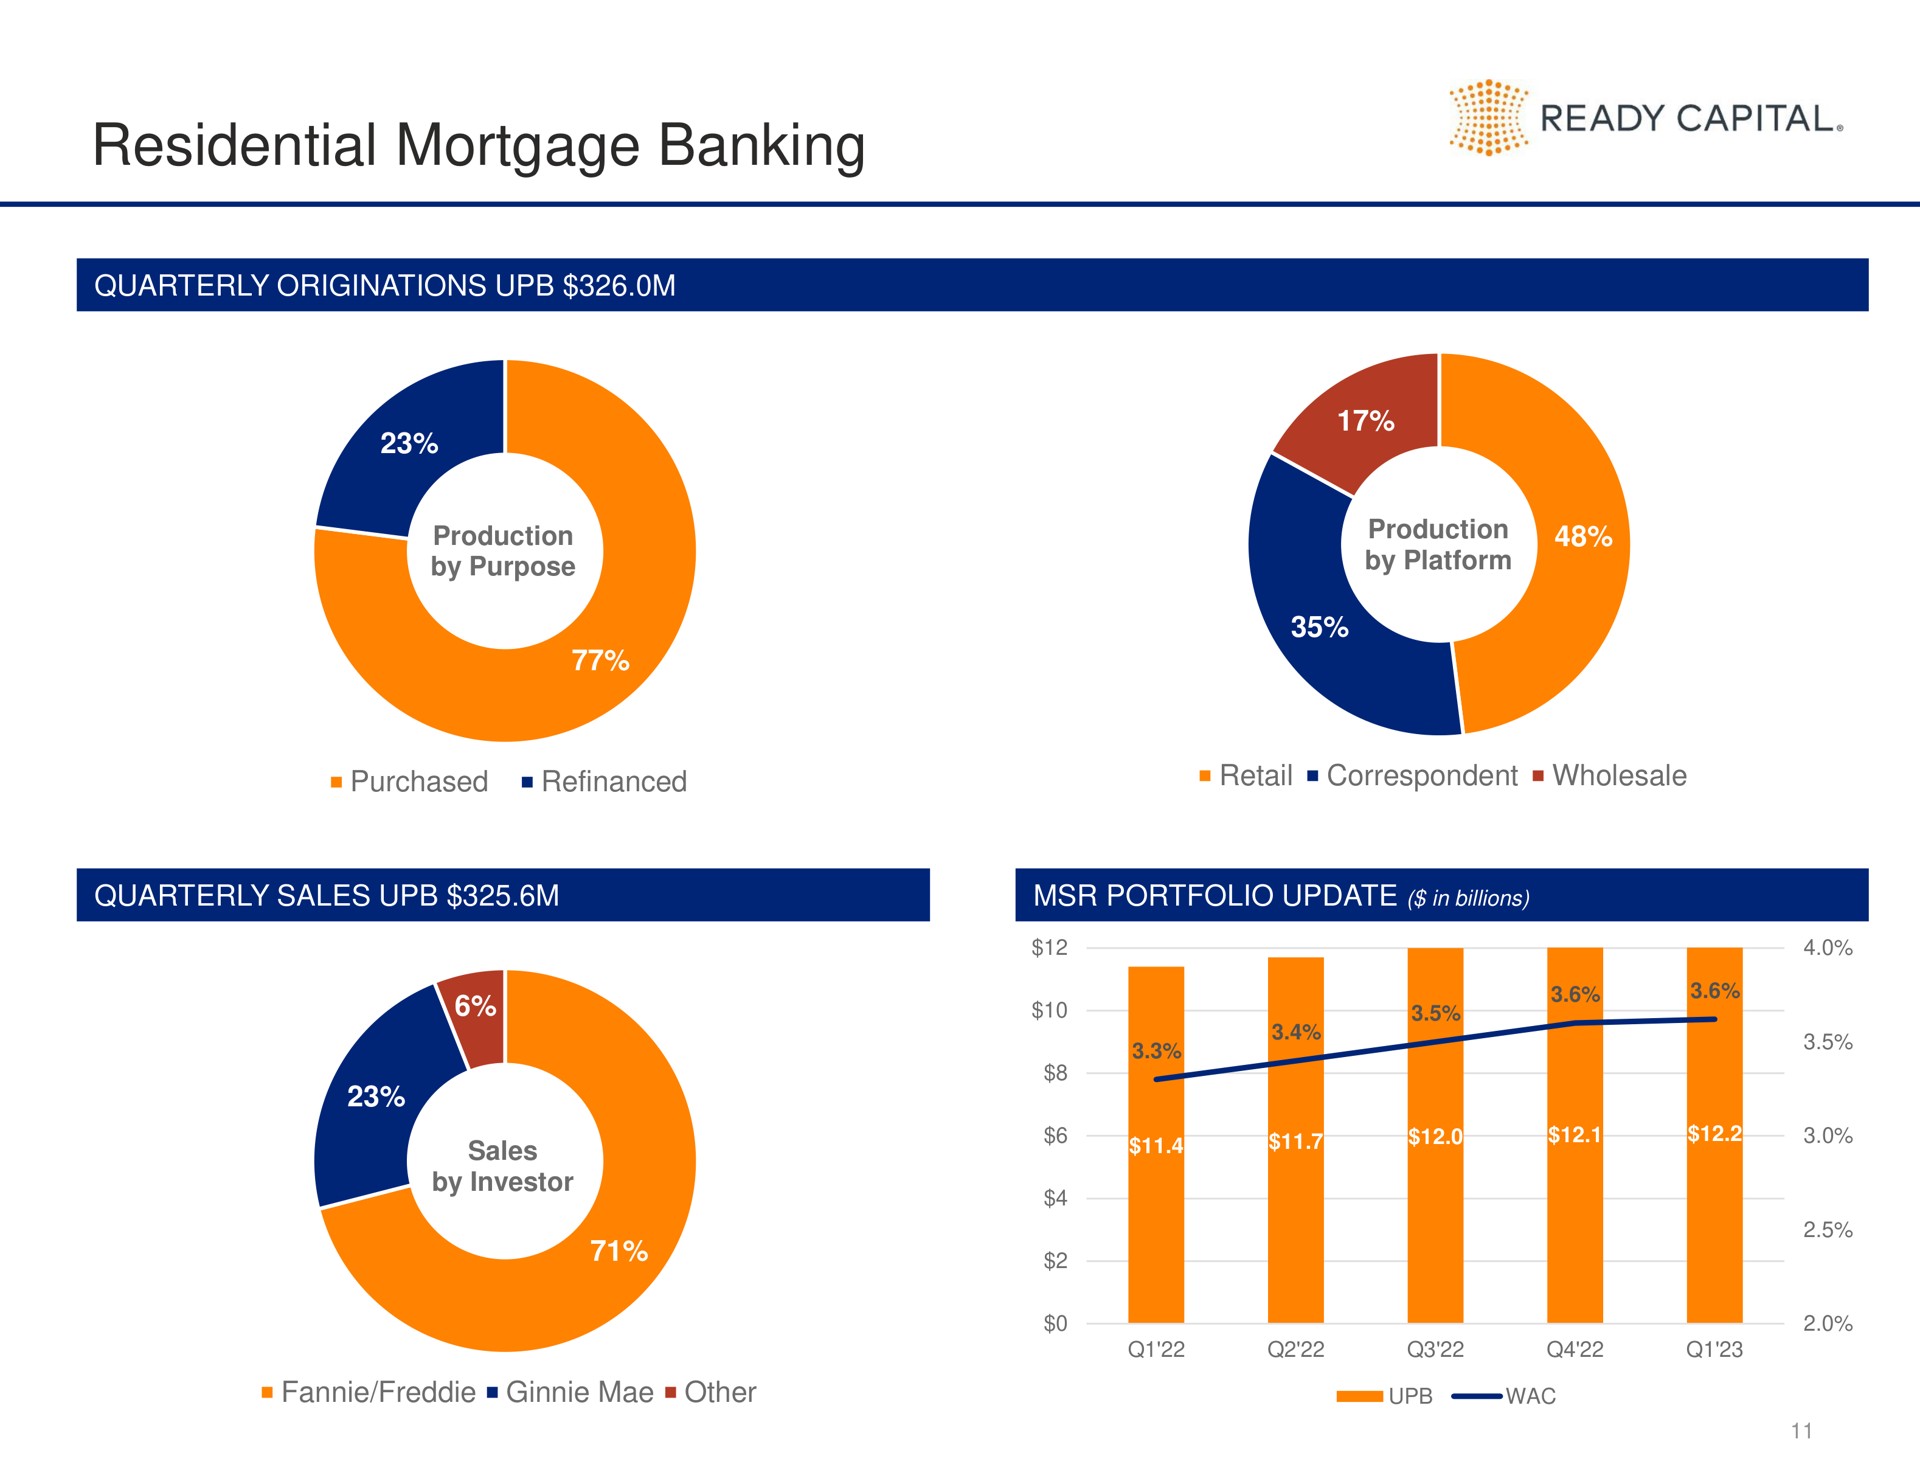 residential mortgage banking ready capital | Ready Capital